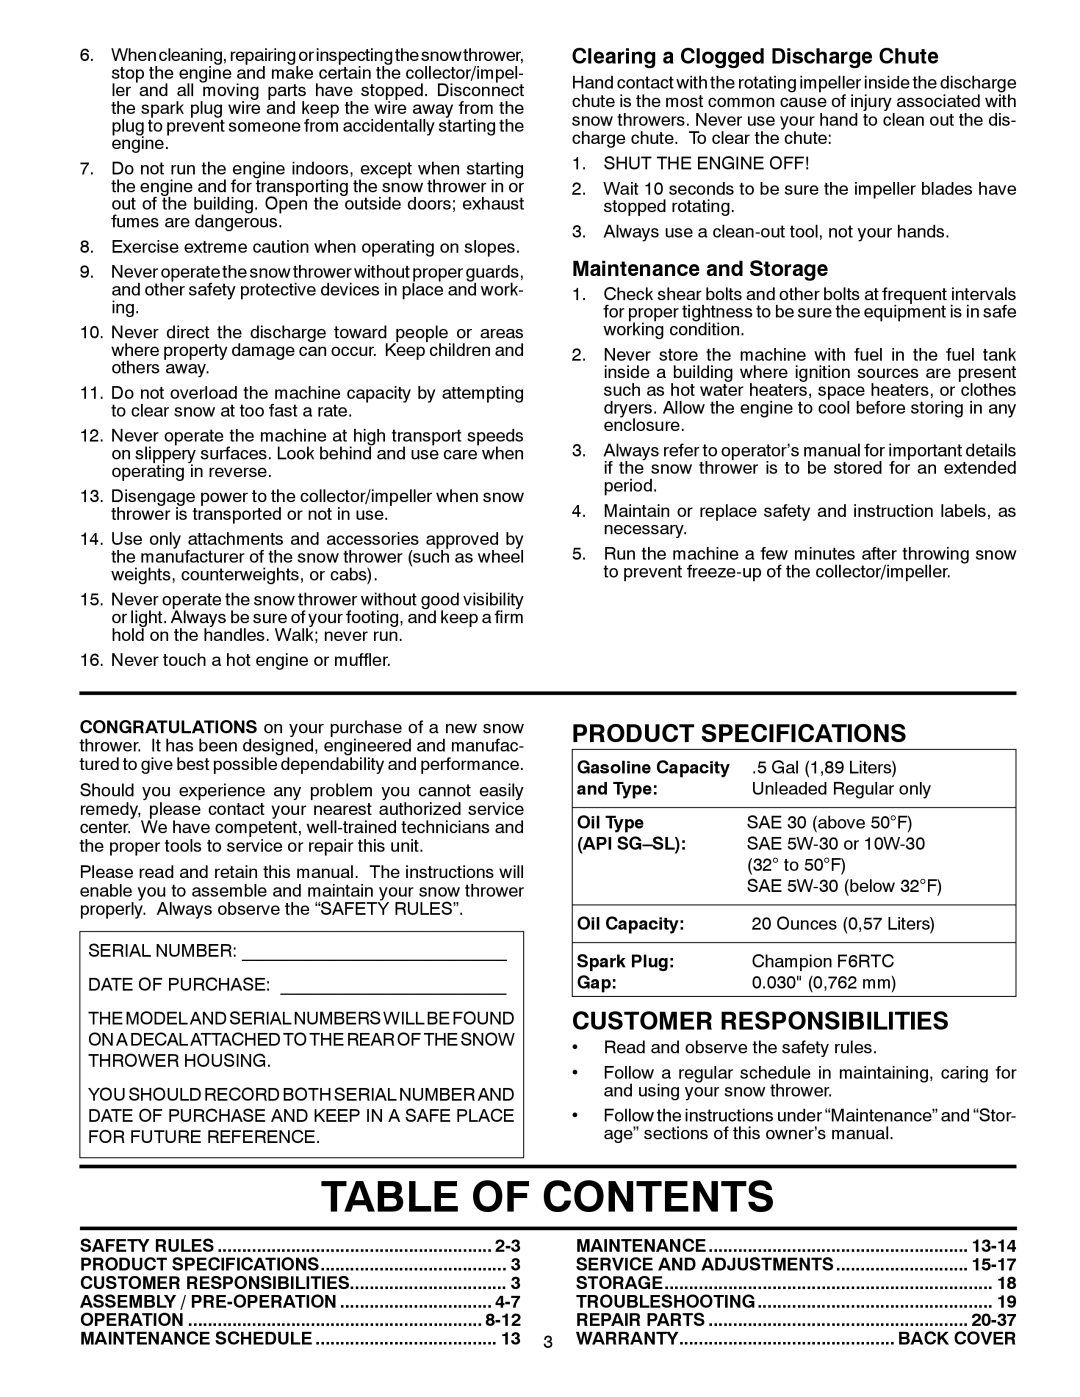 McCulloch MC627ES Table Of Contents, Product Specifications, Customer Responsibilities, Clearing a Clogged Discharge Chute 